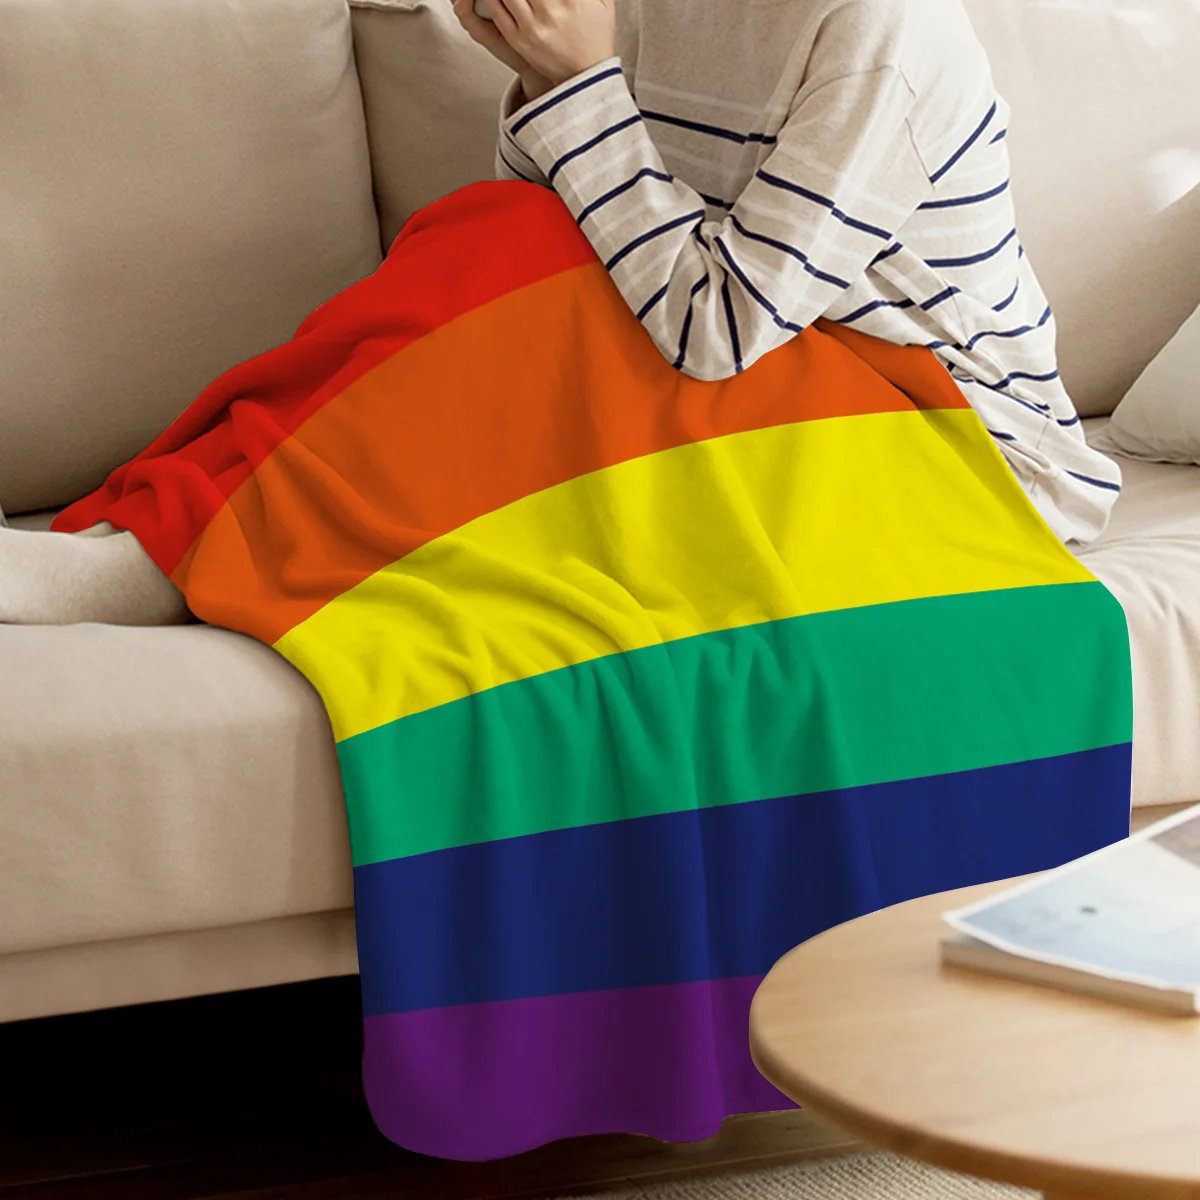 Flannel Blankets Colorful Stripe  Pride Rainbow Blanket Cushion Warm Throws on Sofa Bed Home Bedspread Travel Flannel Blanket